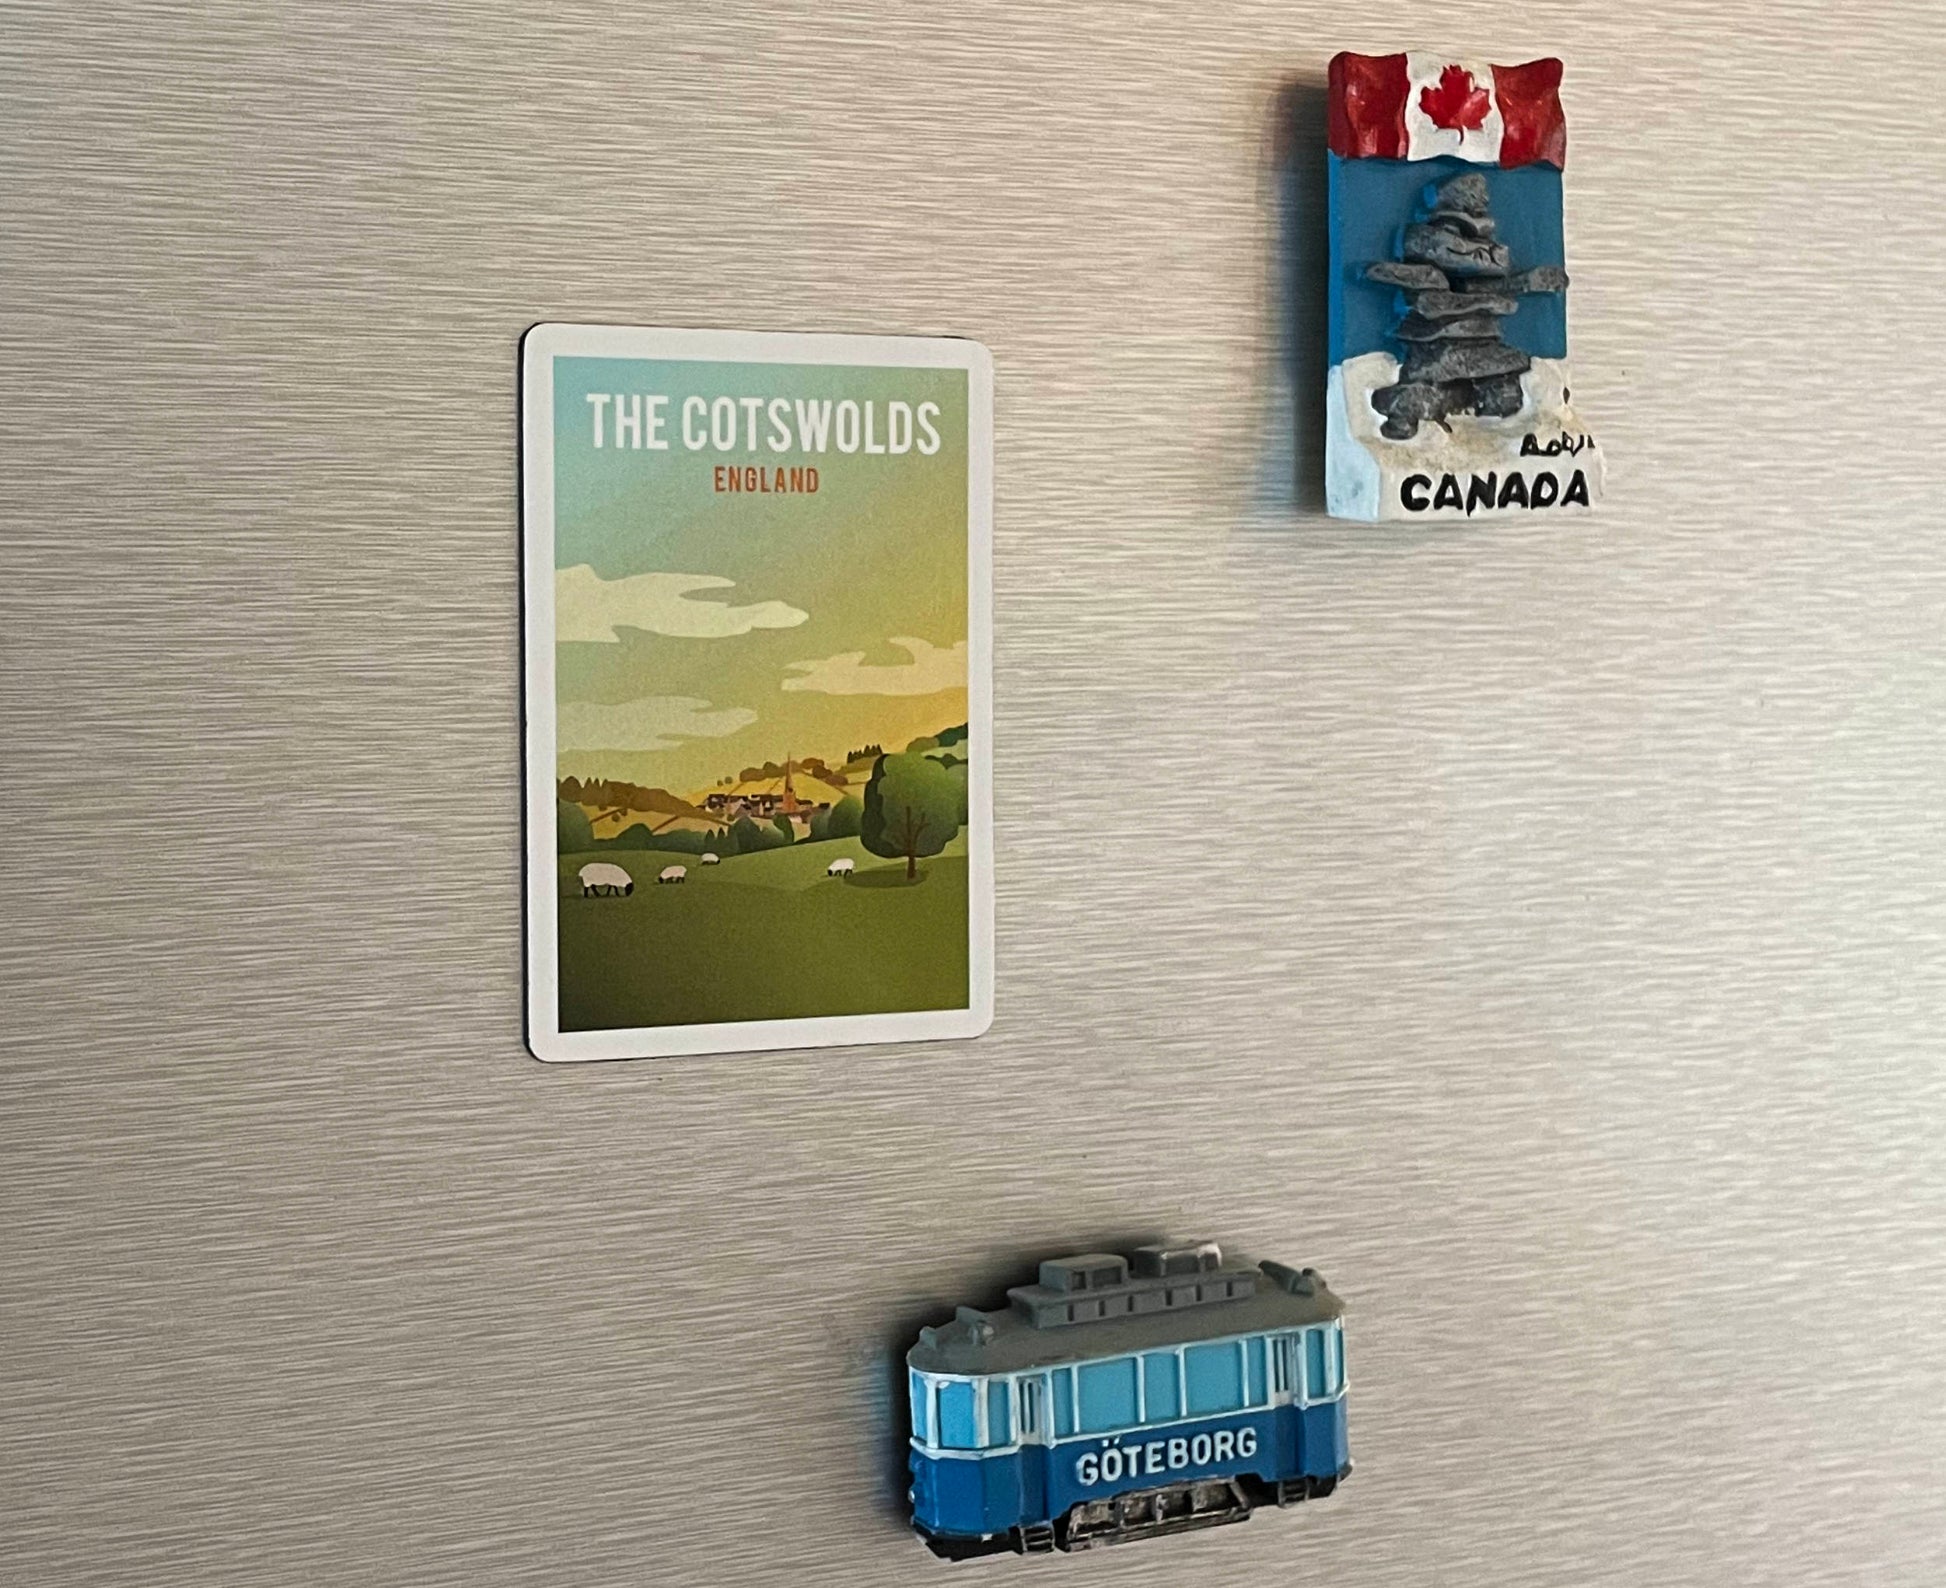 Cotswolds magnet on fridge with other travel souvenirs